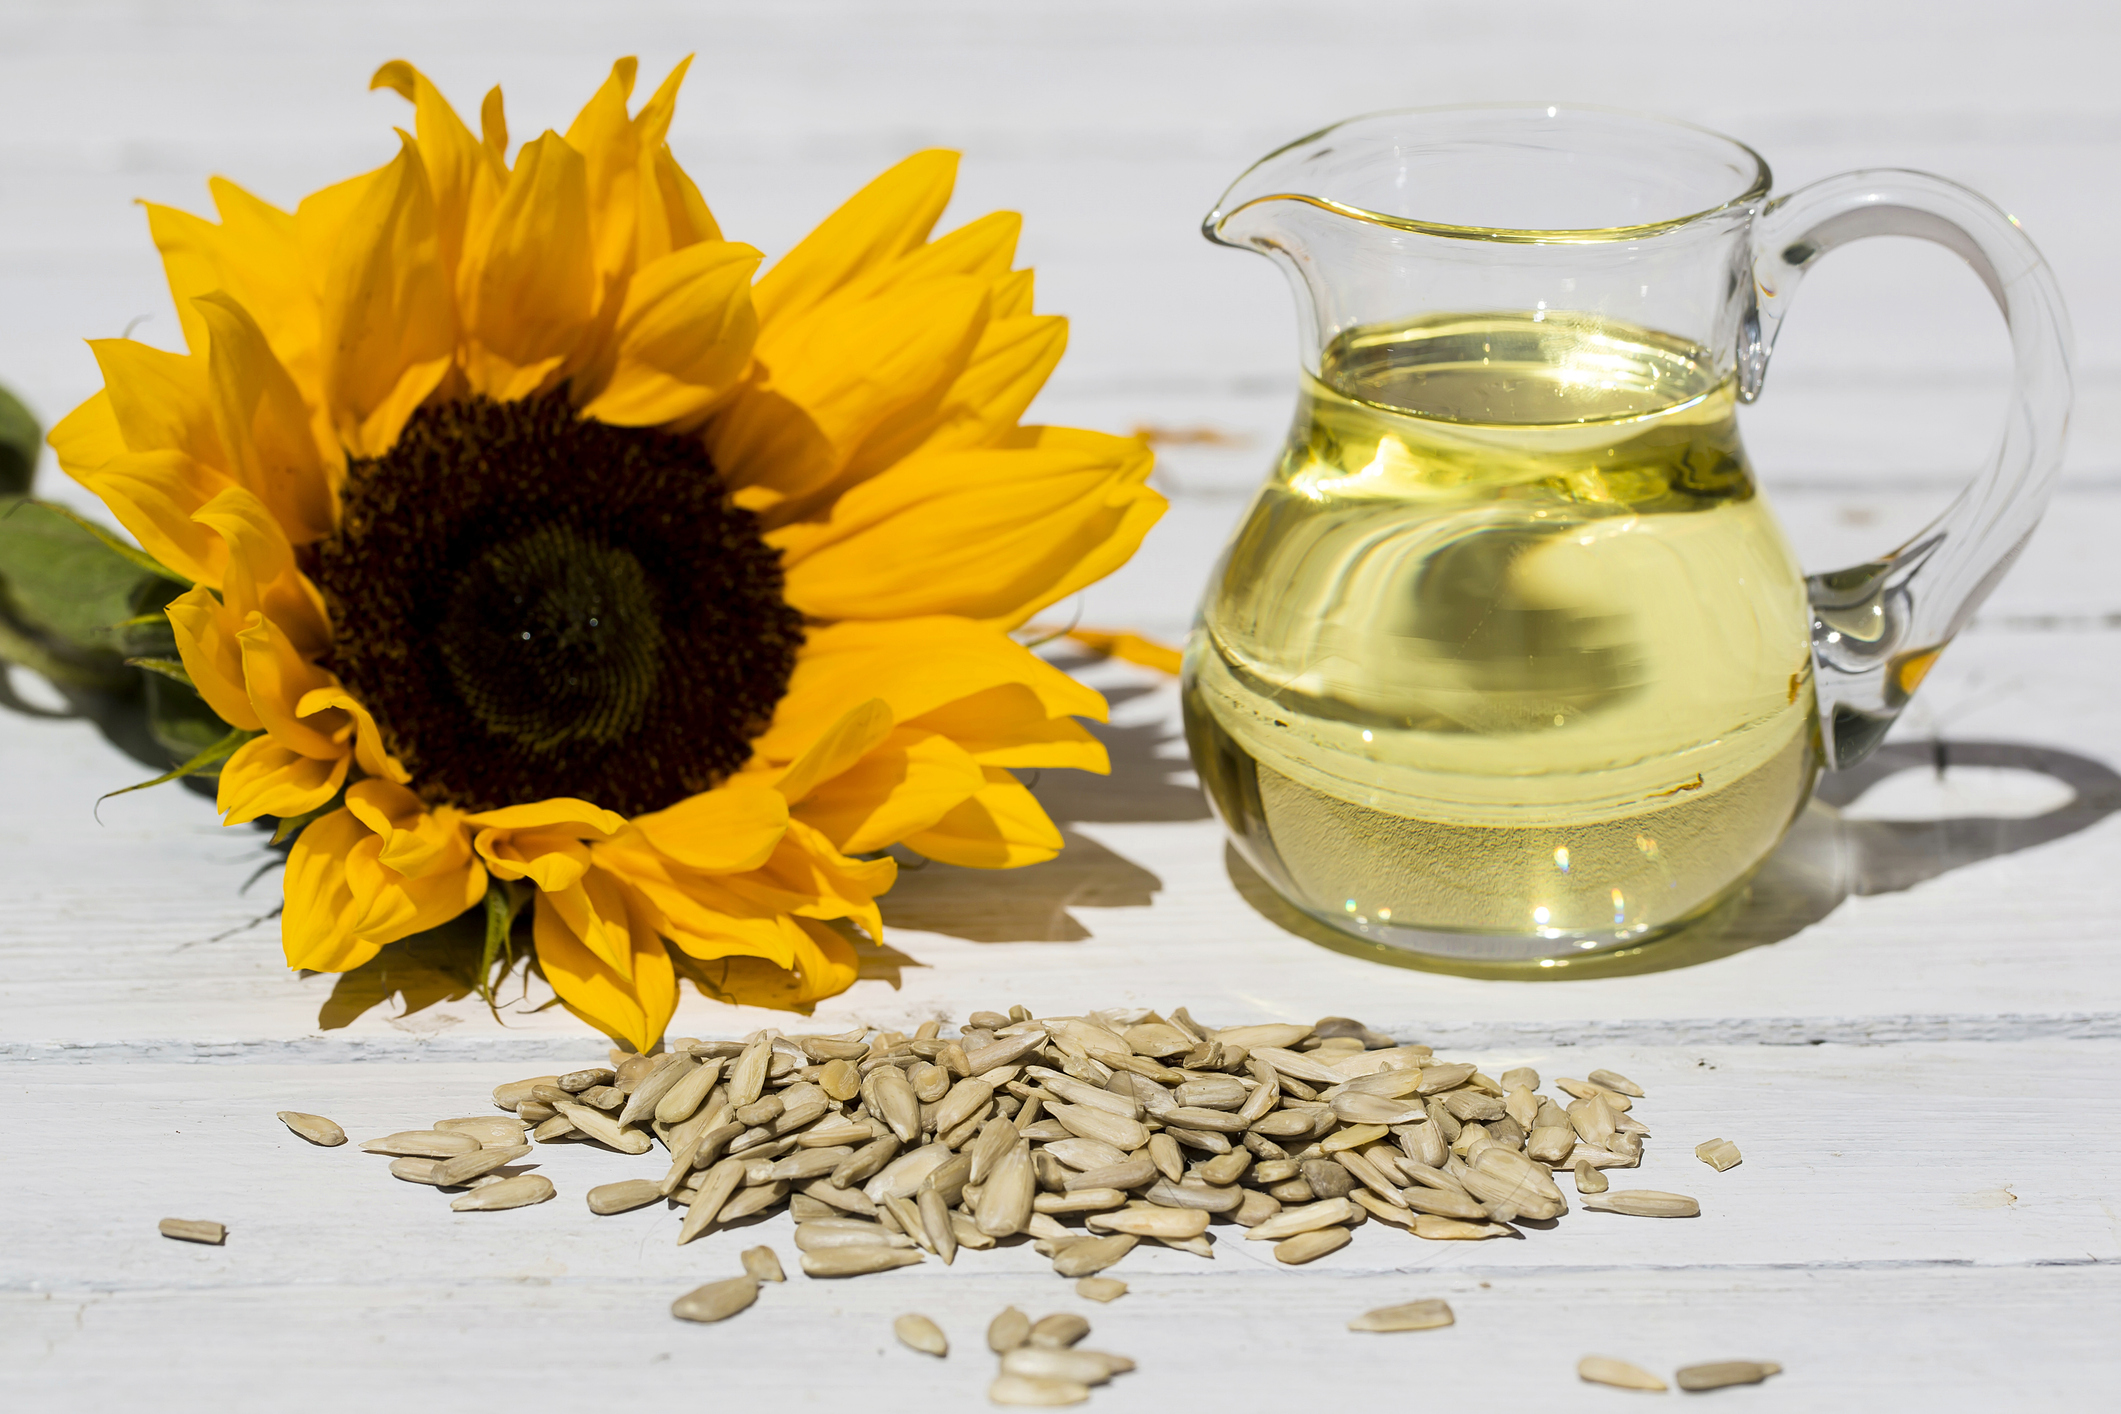 Buy Sunflower Seeds Online at Best Price in Pakistan - ChiltanPure